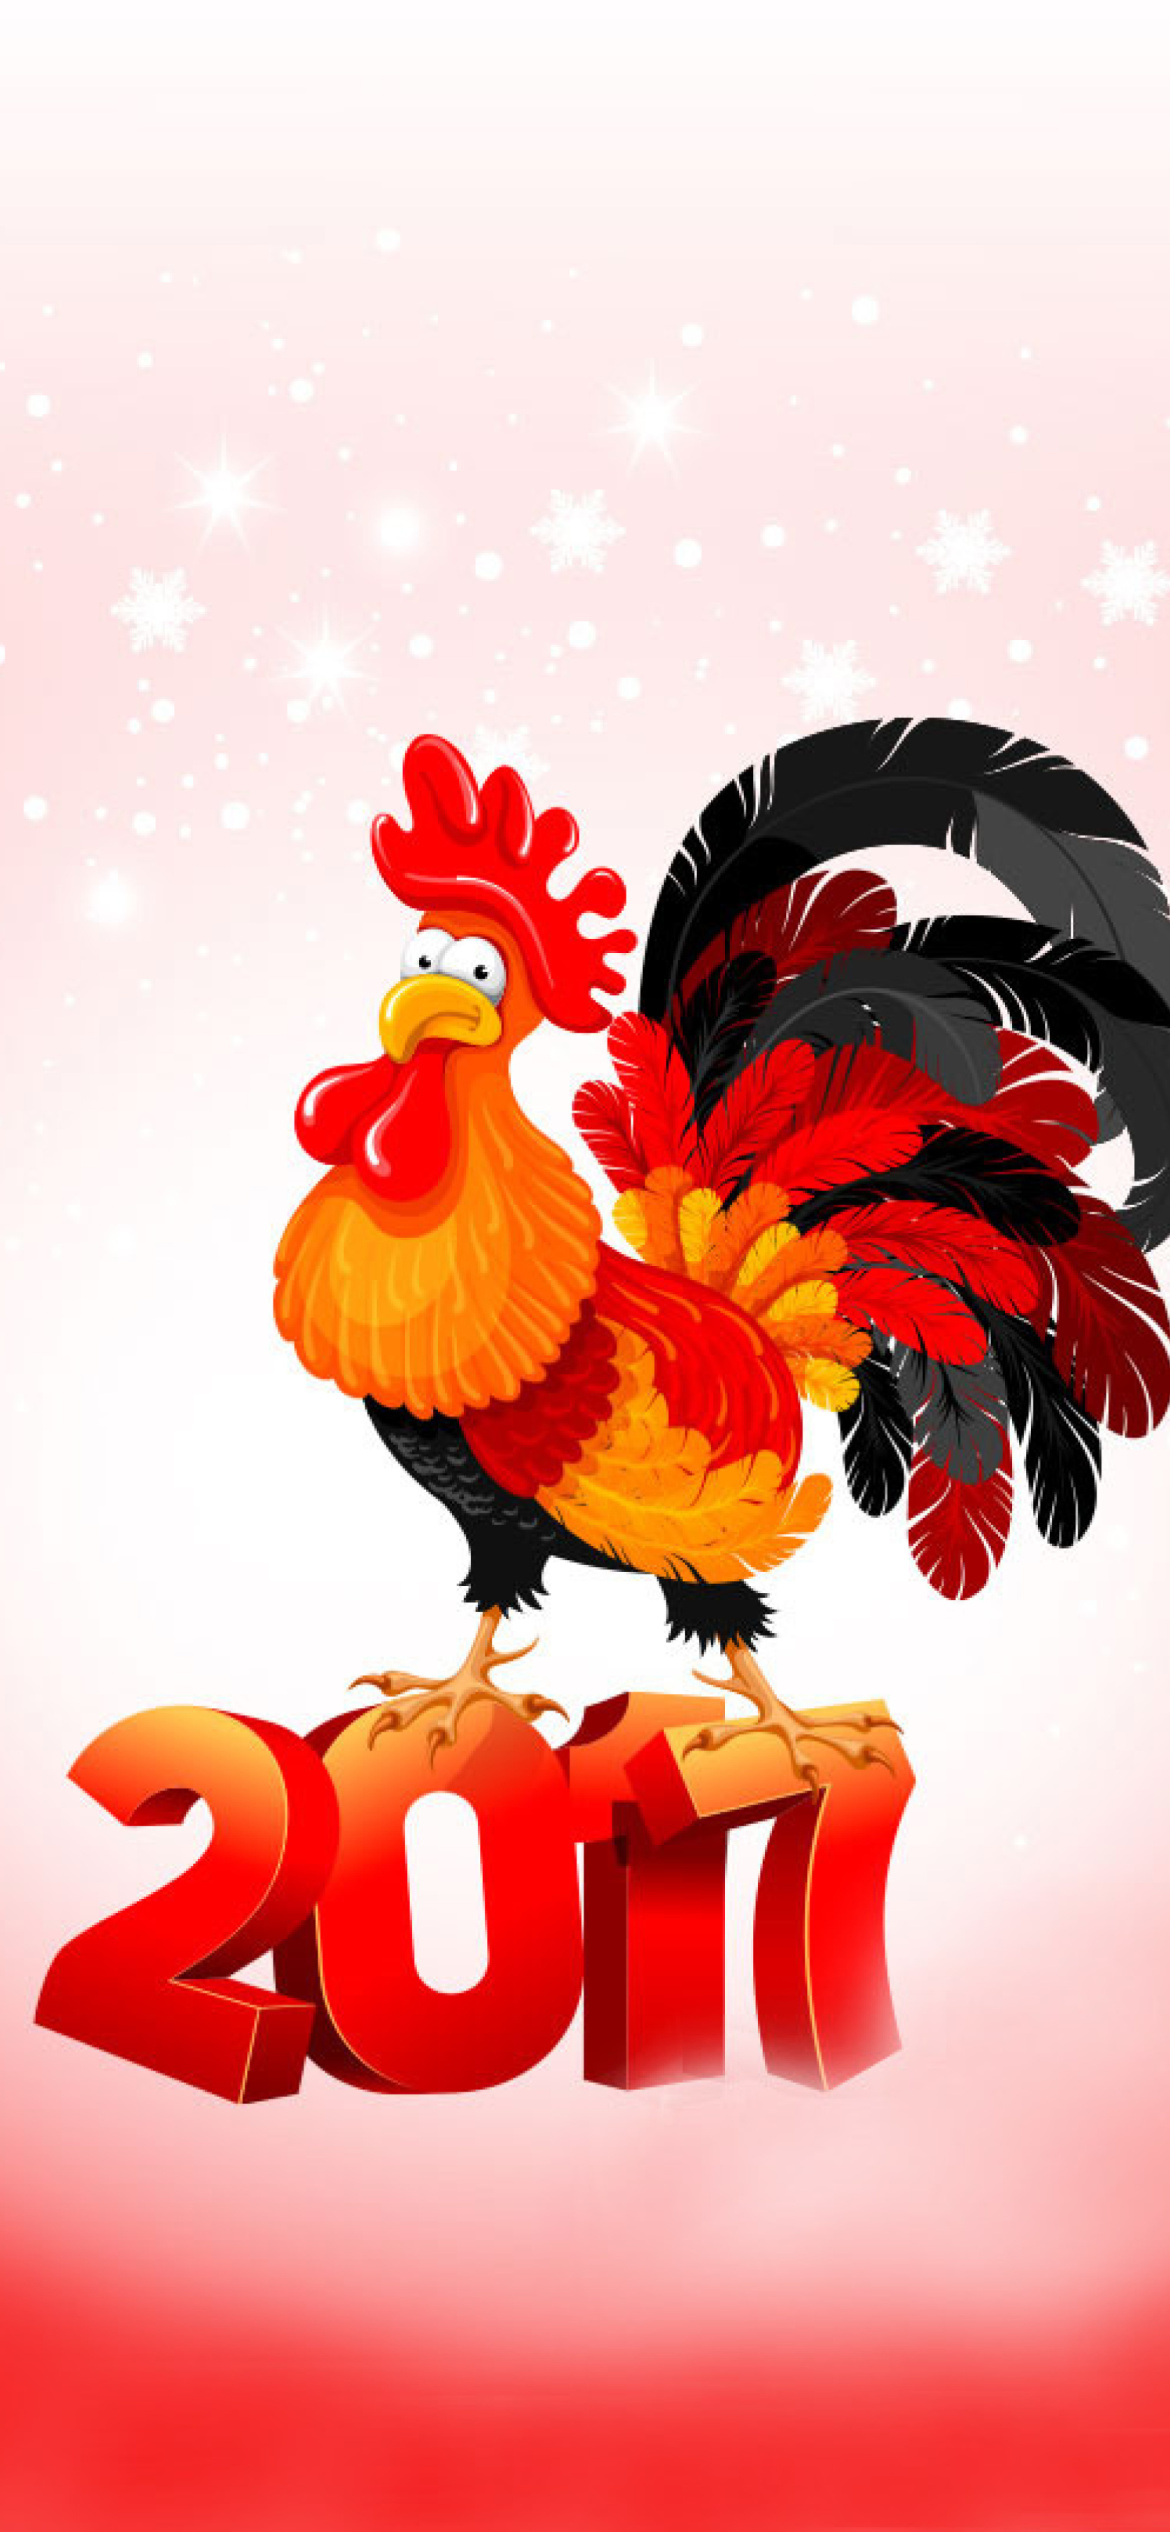 2017 New Year of Cock wallpaper 1170x2532